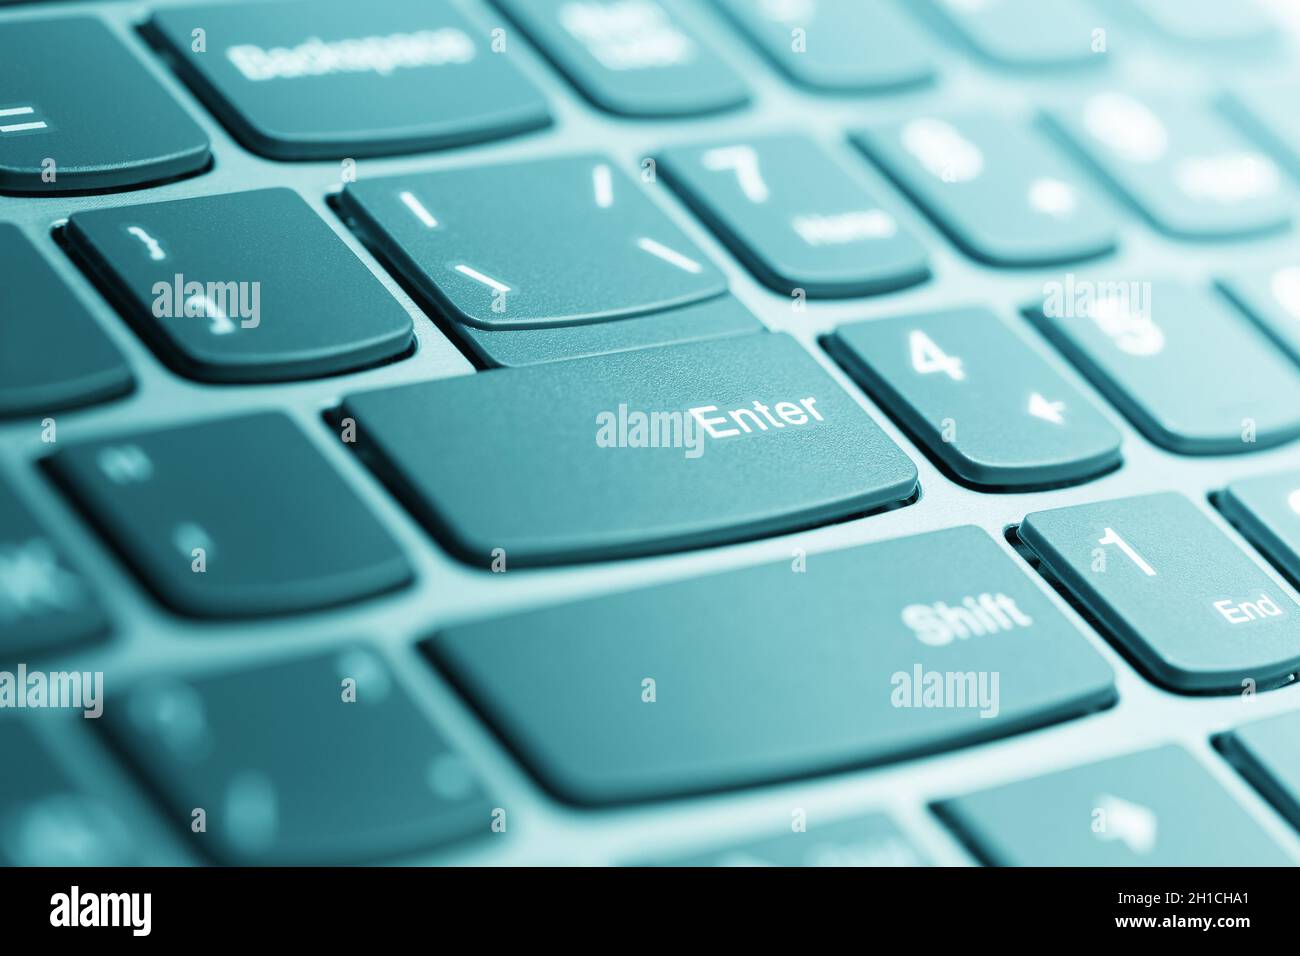 Laptop keyboard. Photo with shallow depth of field, toned in aqua Stock Photo